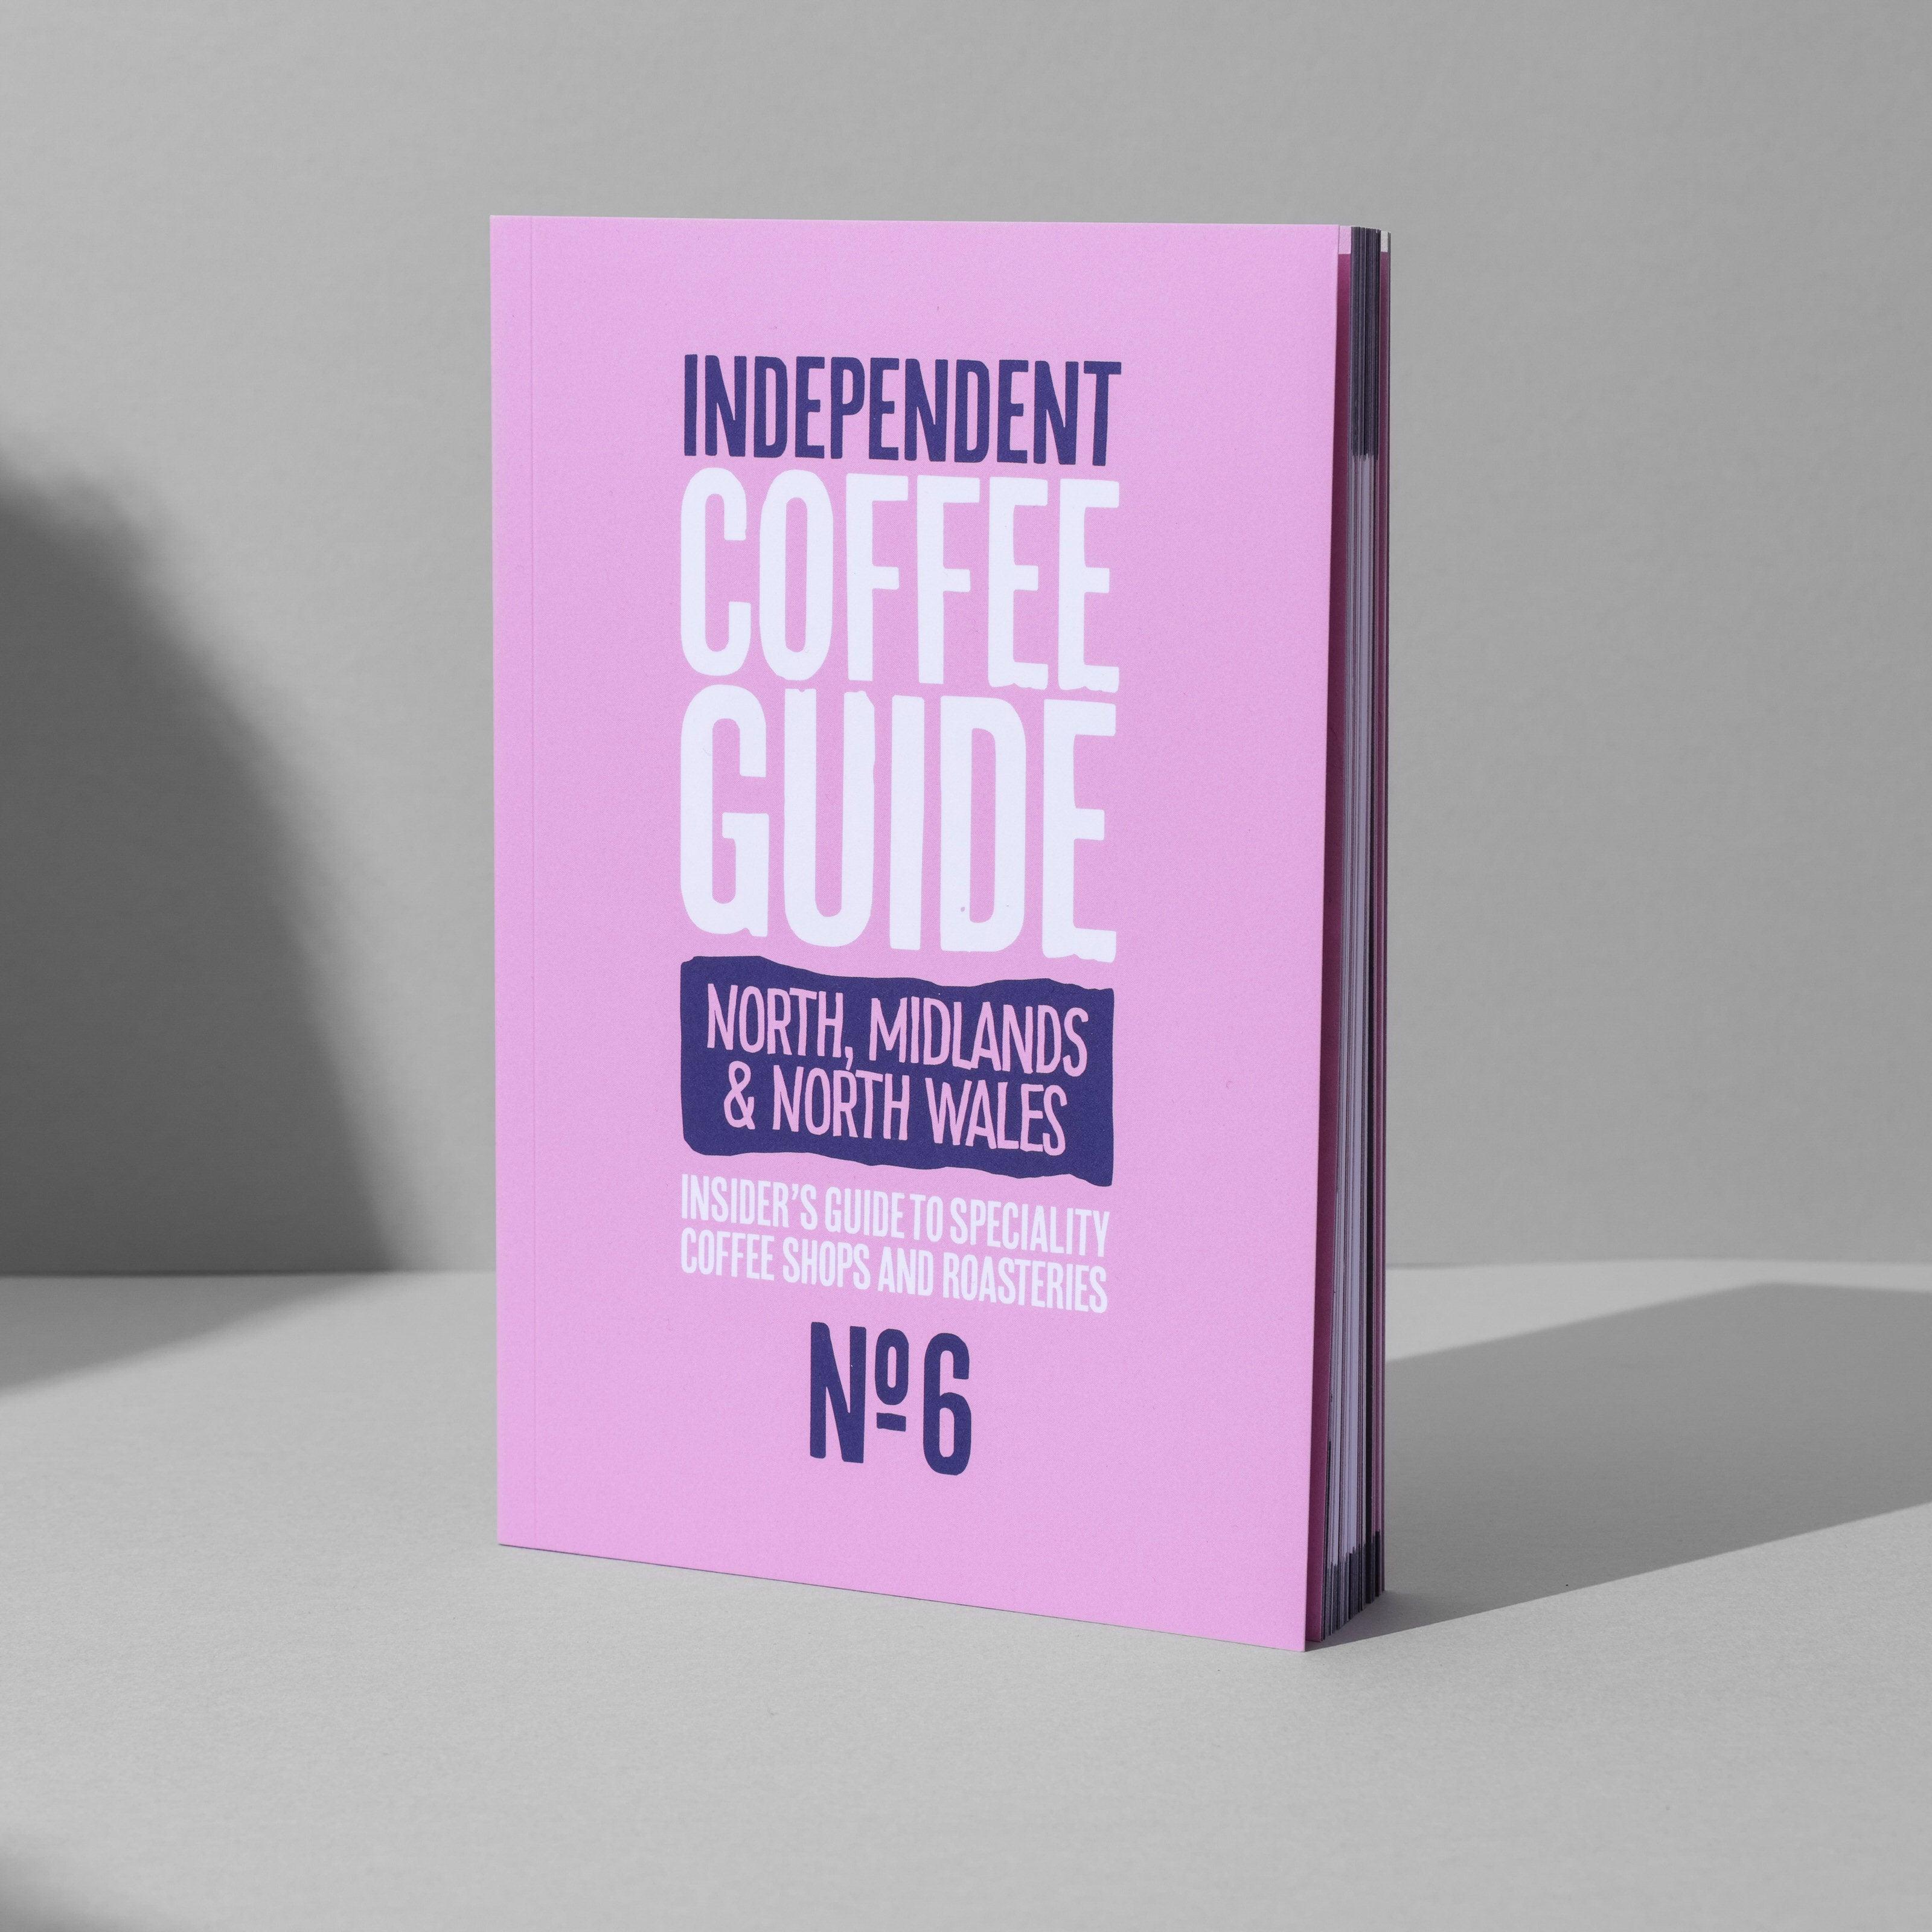 Independent Coffee Guide North, Midlands & North Wales No.6 